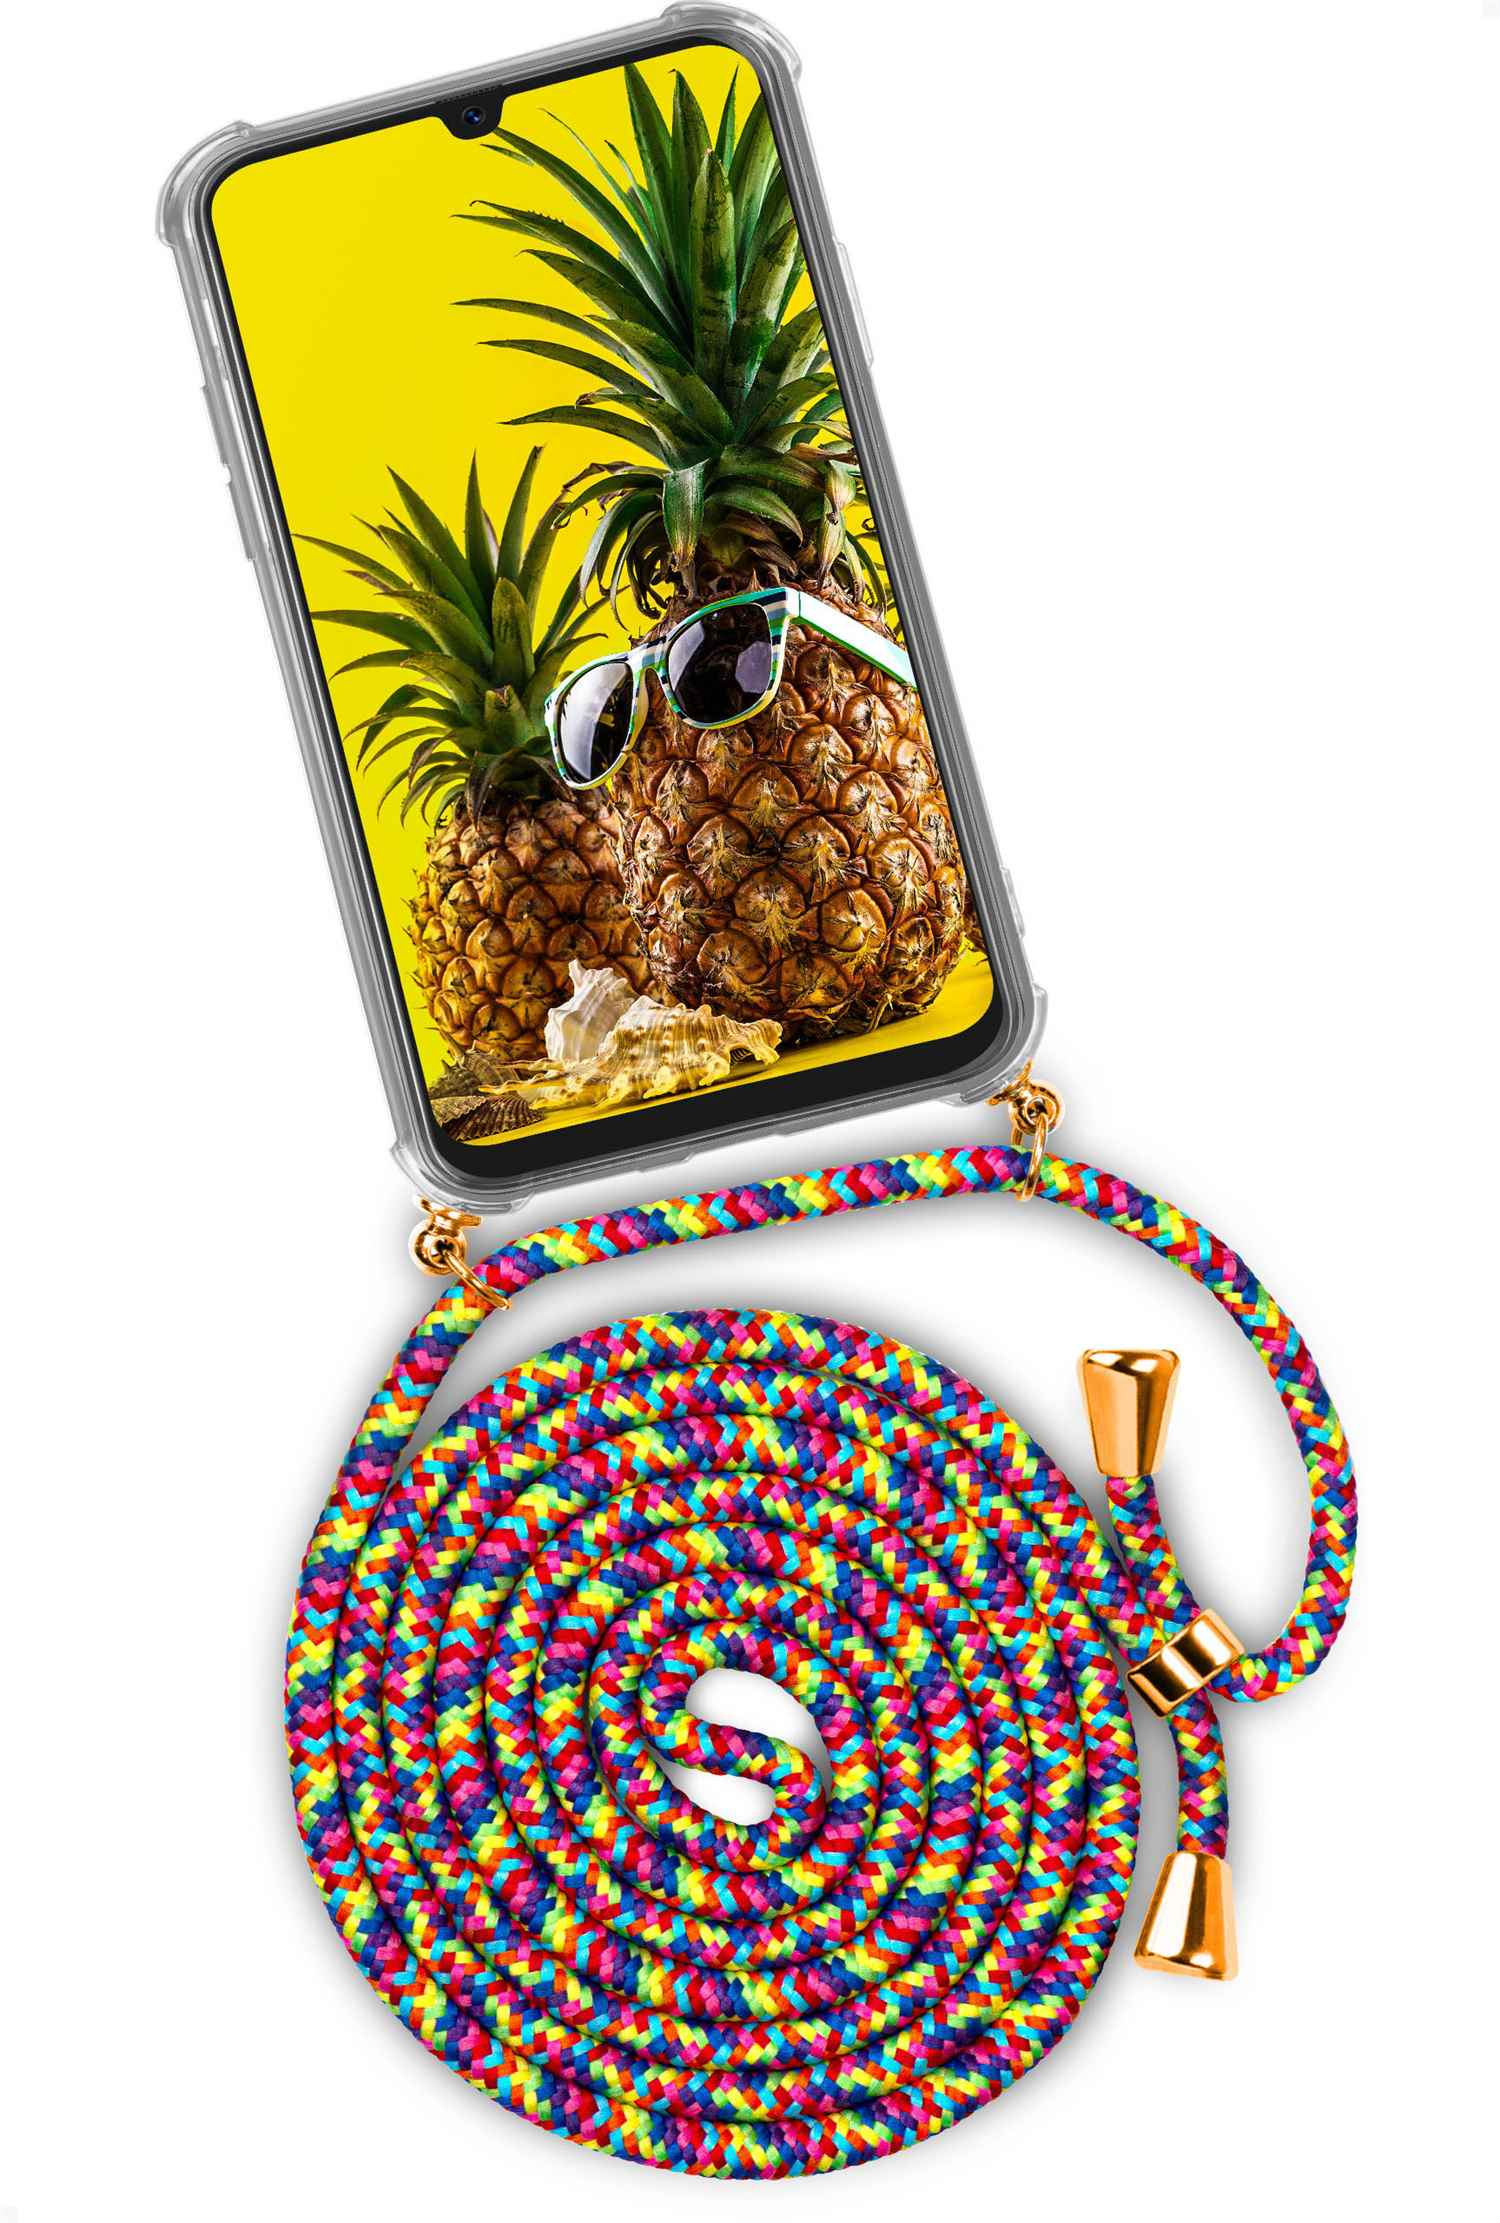 Fruity ONEFLOW Twist Friday A50, Galaxy Samsung, (Gold) Case, Backcover,